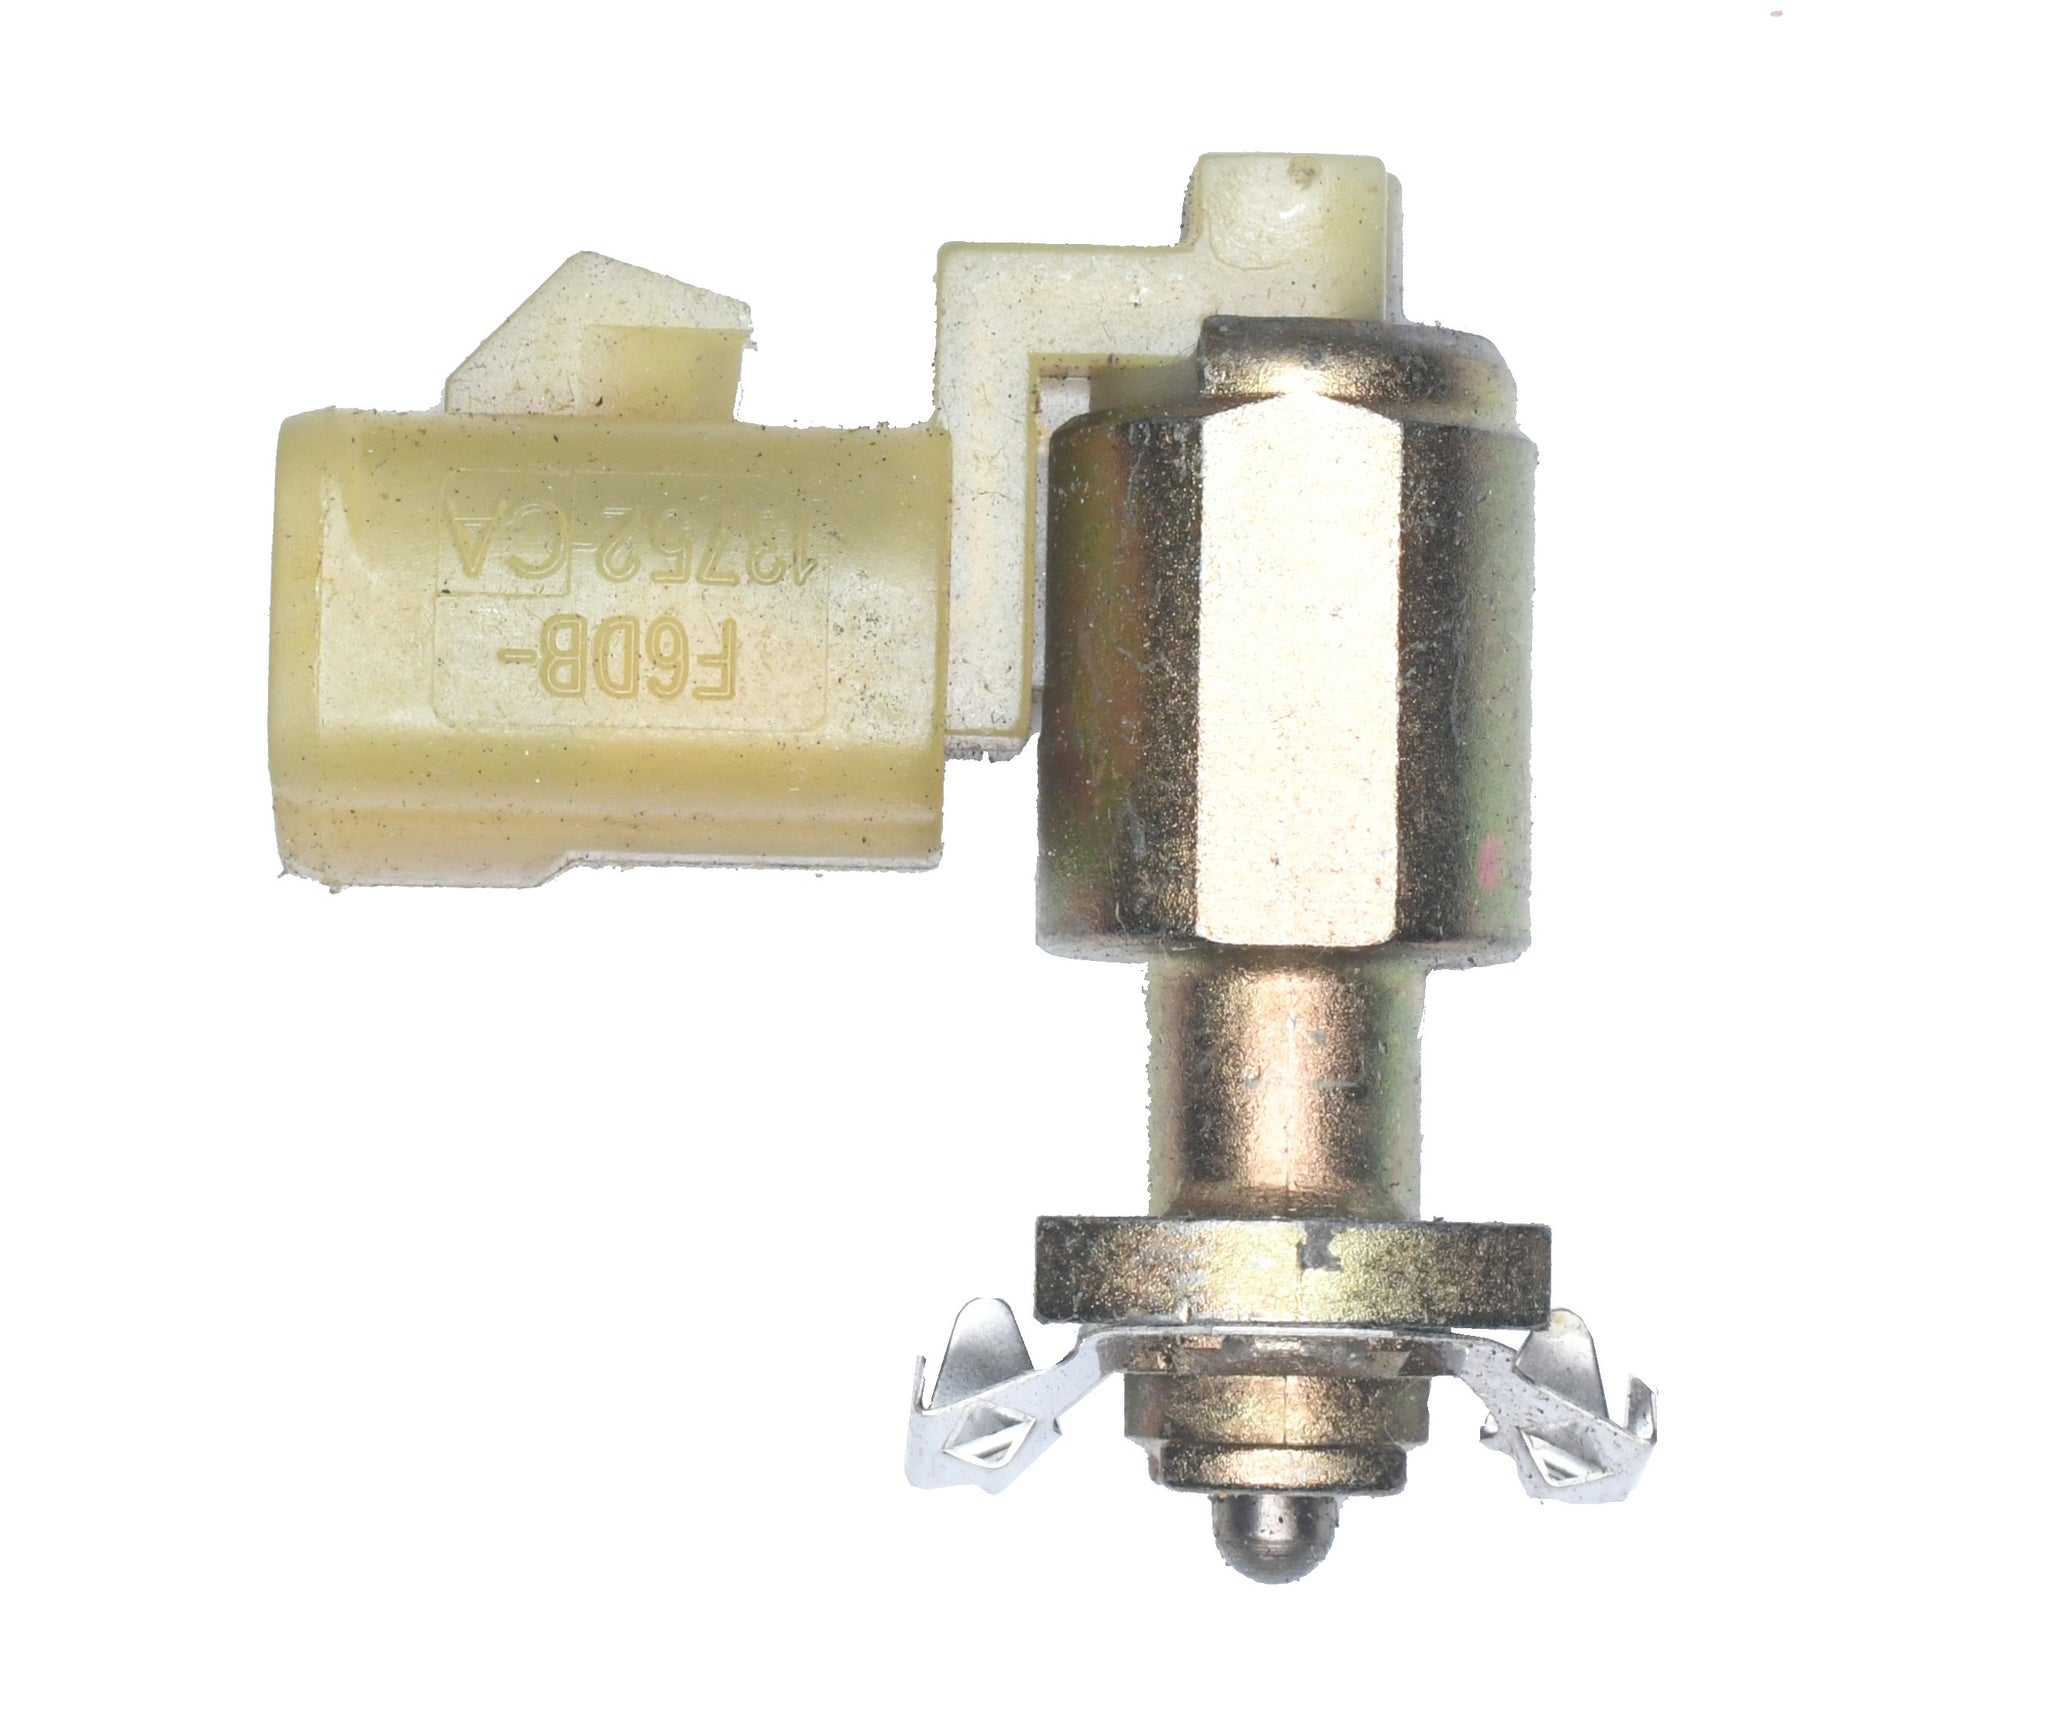 New interior lamp switch for Mustang, Taurus, Continental, Mark VIII & Sable